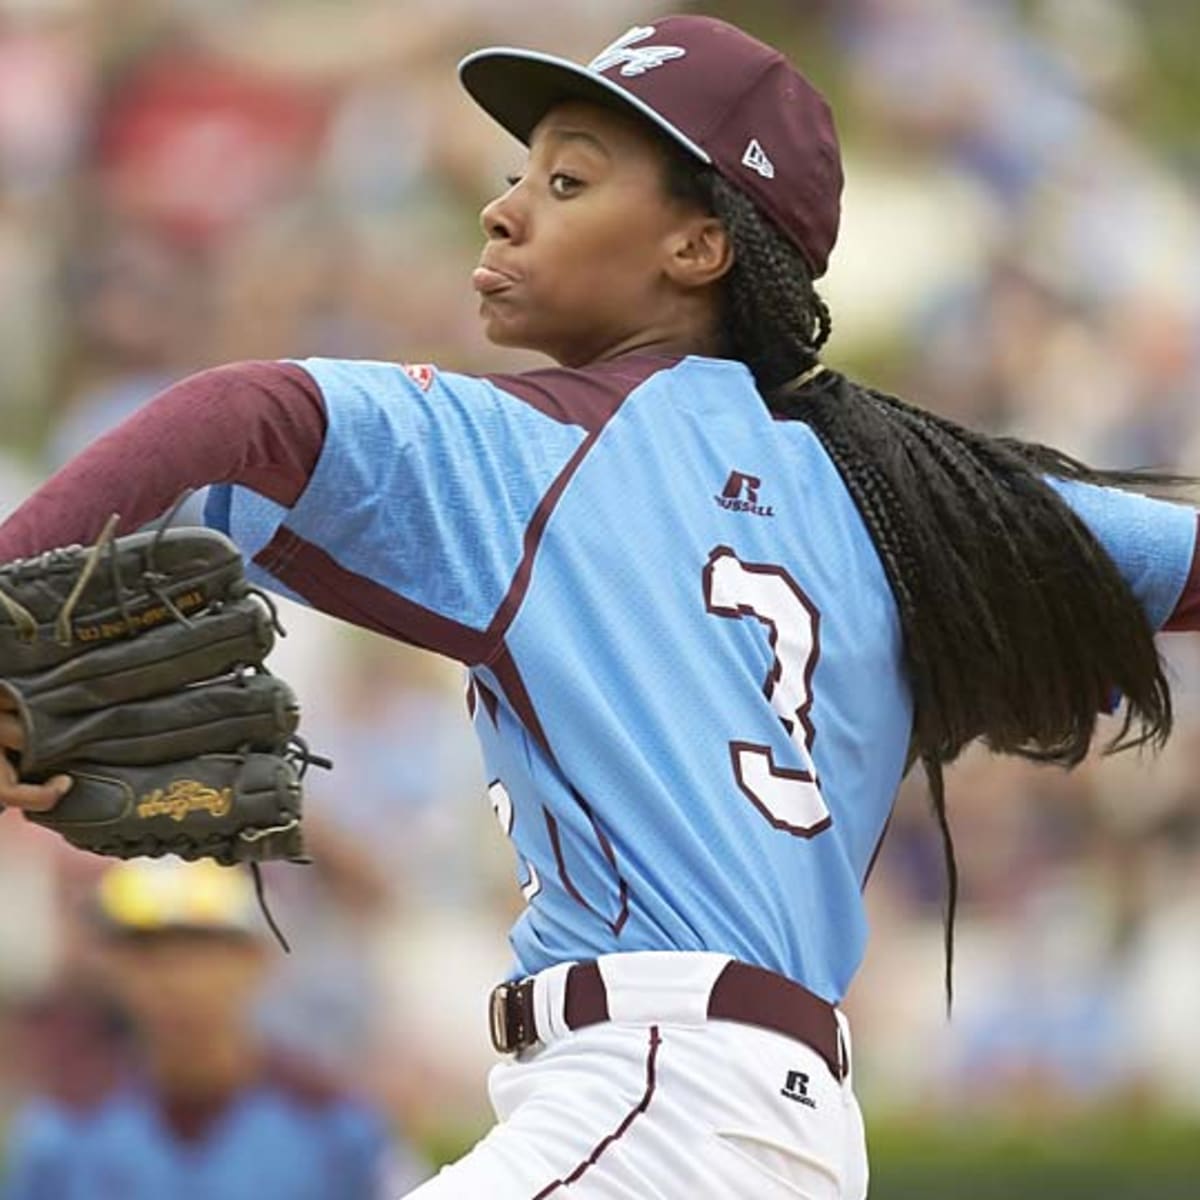 Mo'ne Davis Pitches Record Ratings for Little League World Series